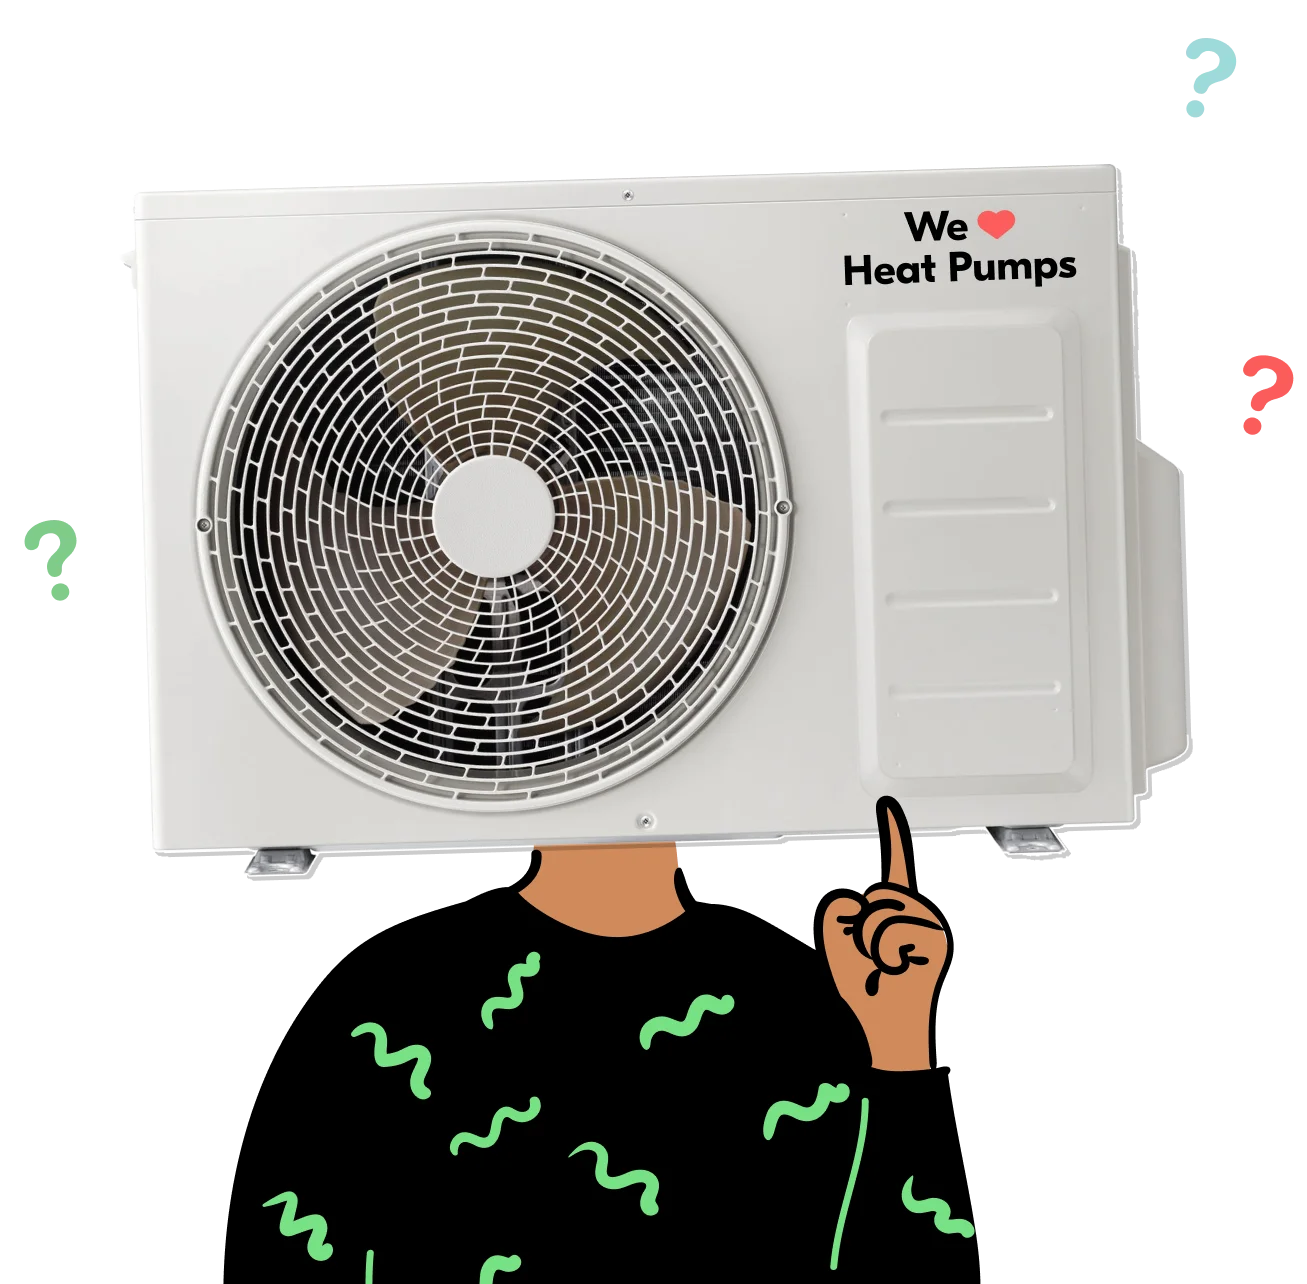 Person with questions about heat pumps